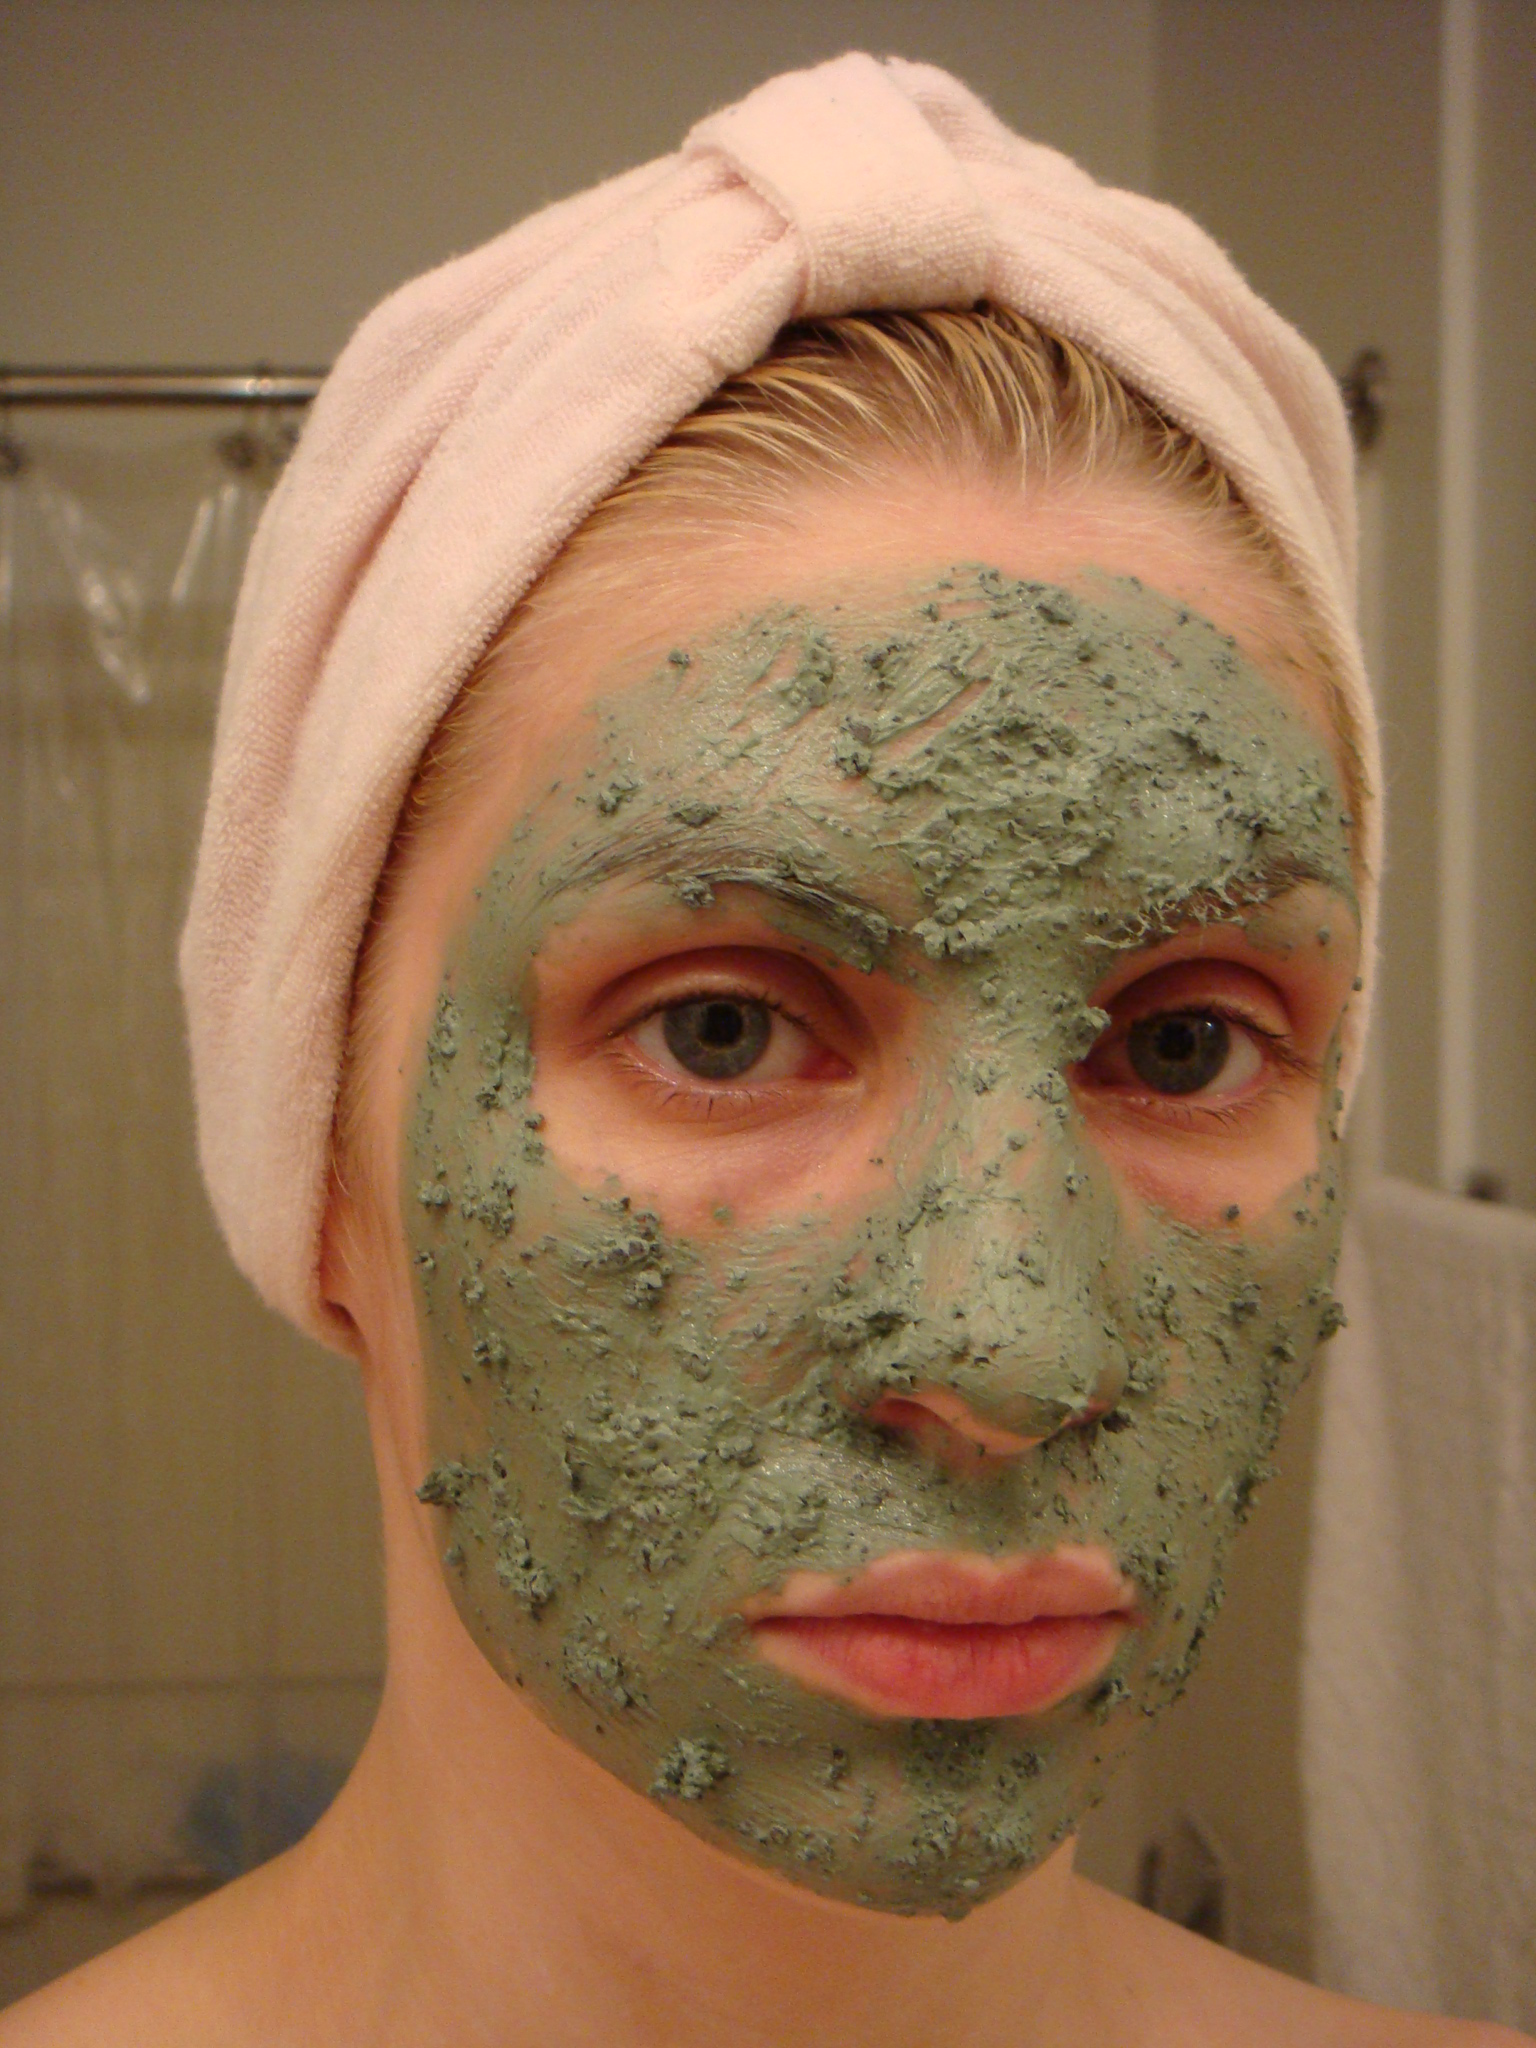 a woman with green facial mask in bathroom